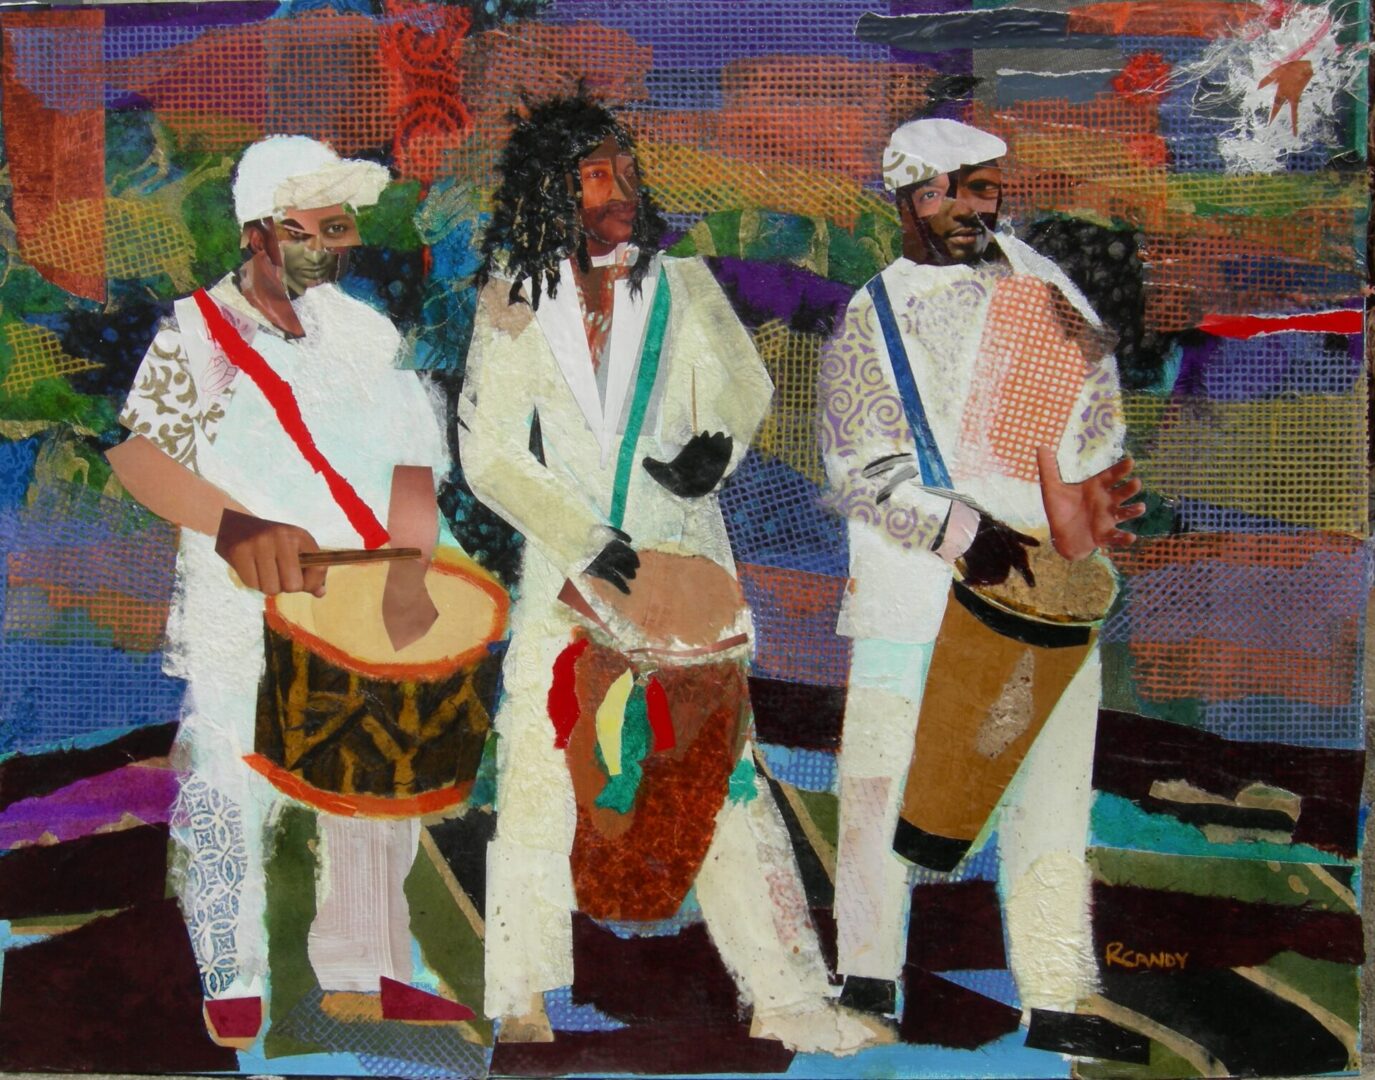 Three men in white are playing drums and one is holding a drum.